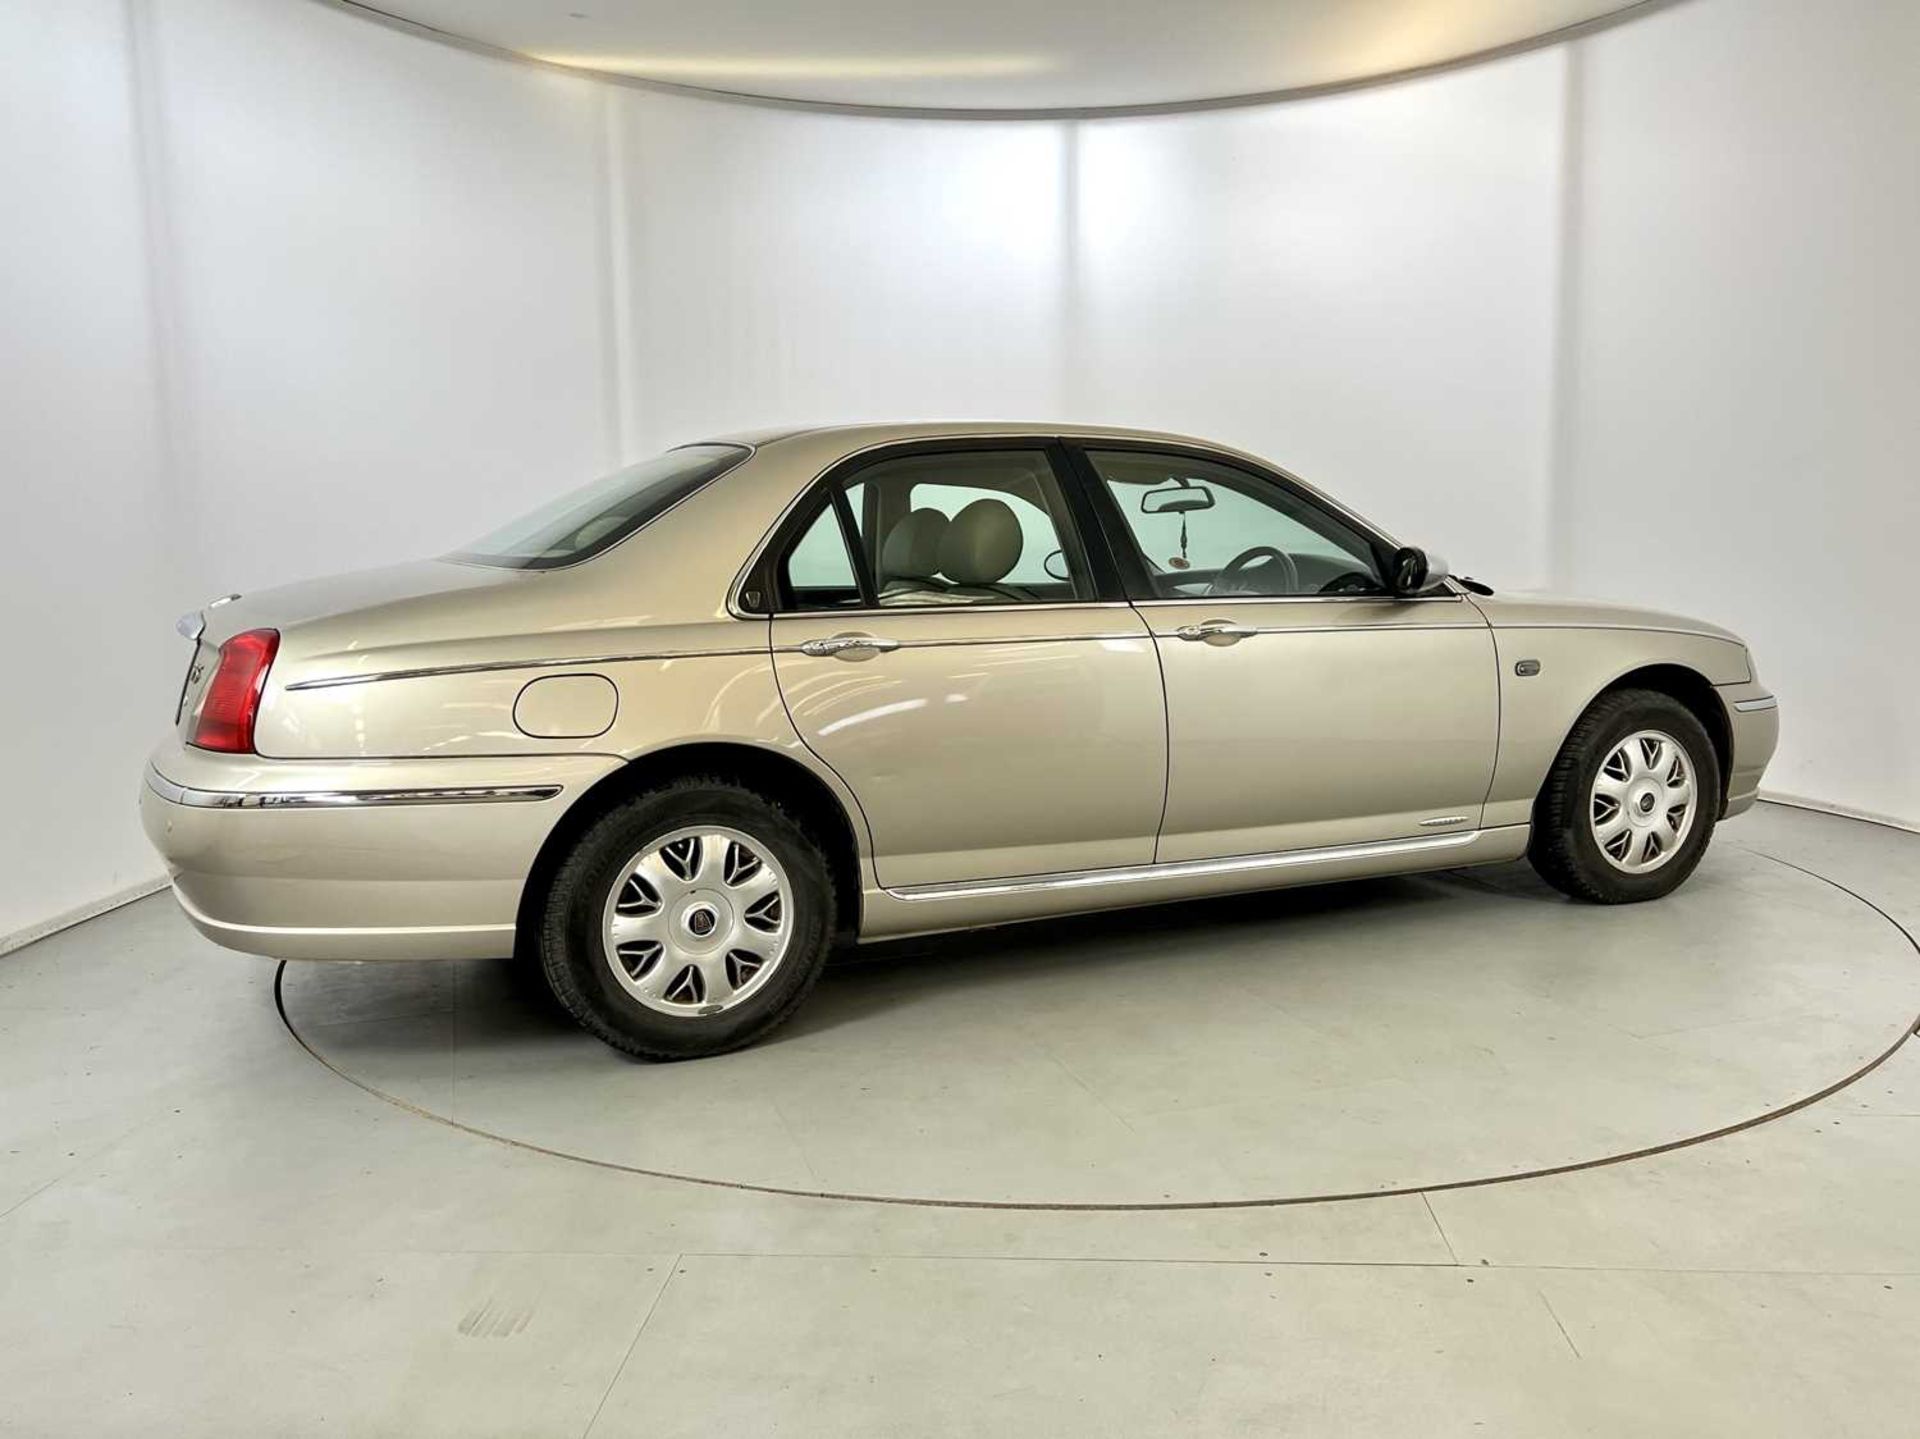 2000 Rover 75 Connoisseur - Image 10 of 34